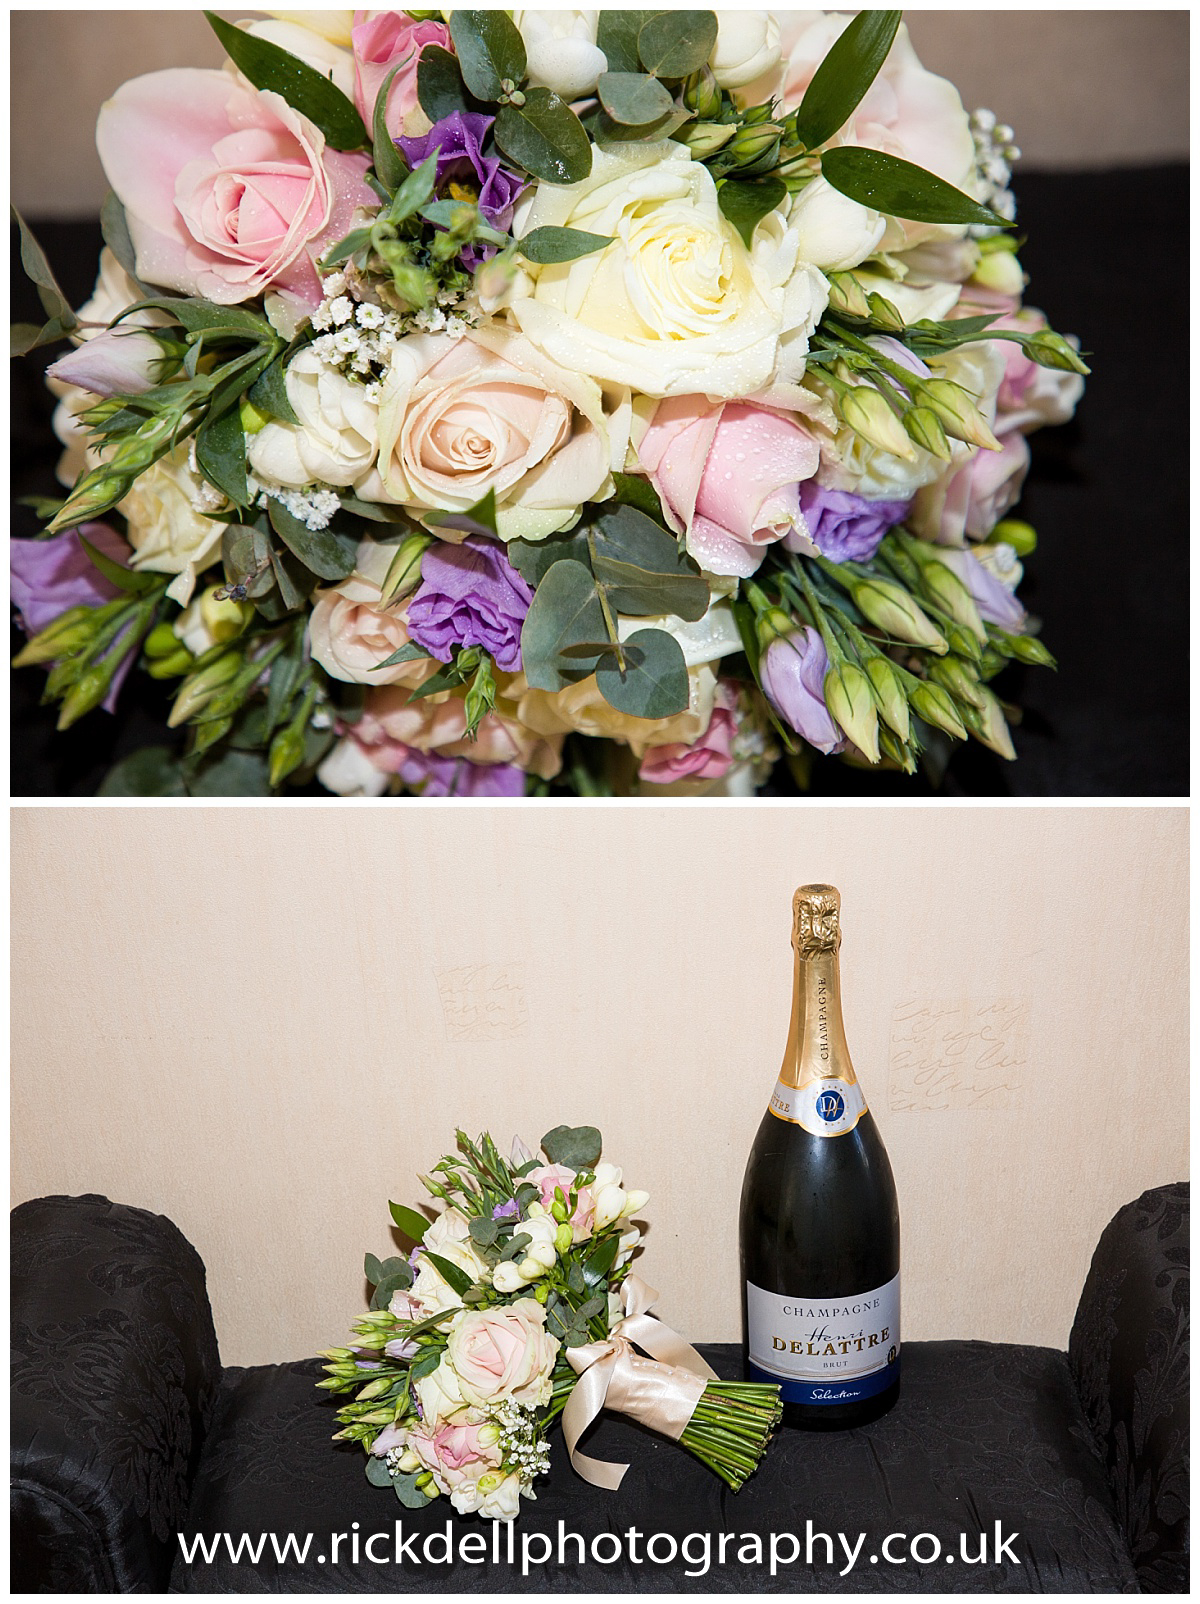 Wedding Photography Manchester - Tamsyn and Jamie's Hyde Bank Farm Wedding Day 4